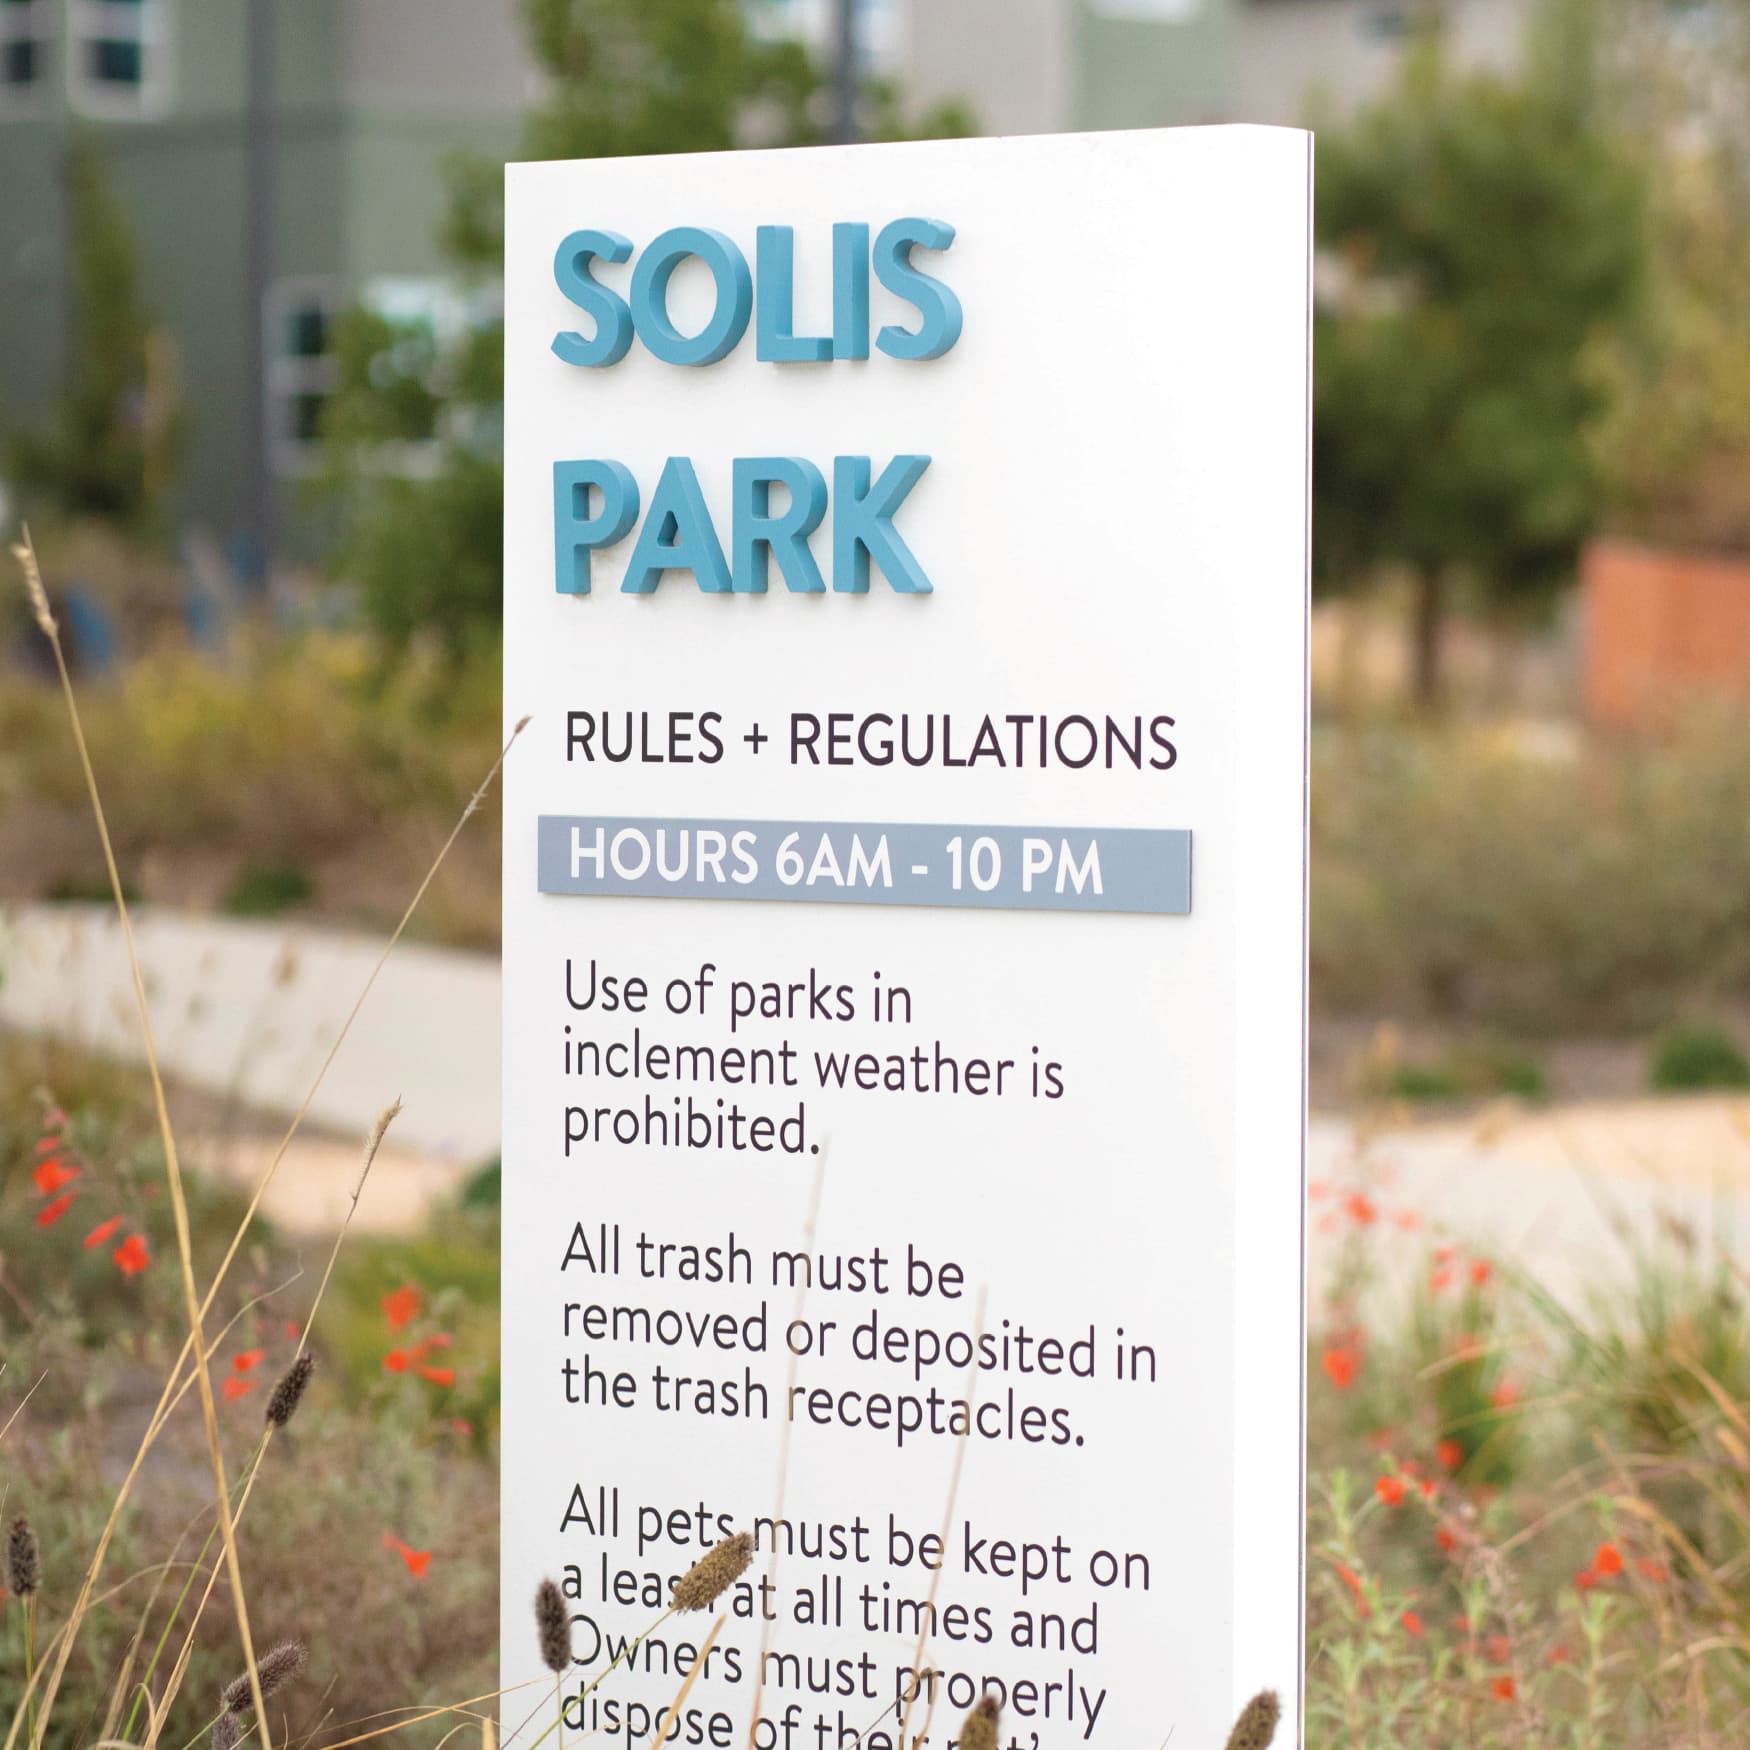 Rules and regulations sign designed by RSM Design for Solis Park in Irvine, California